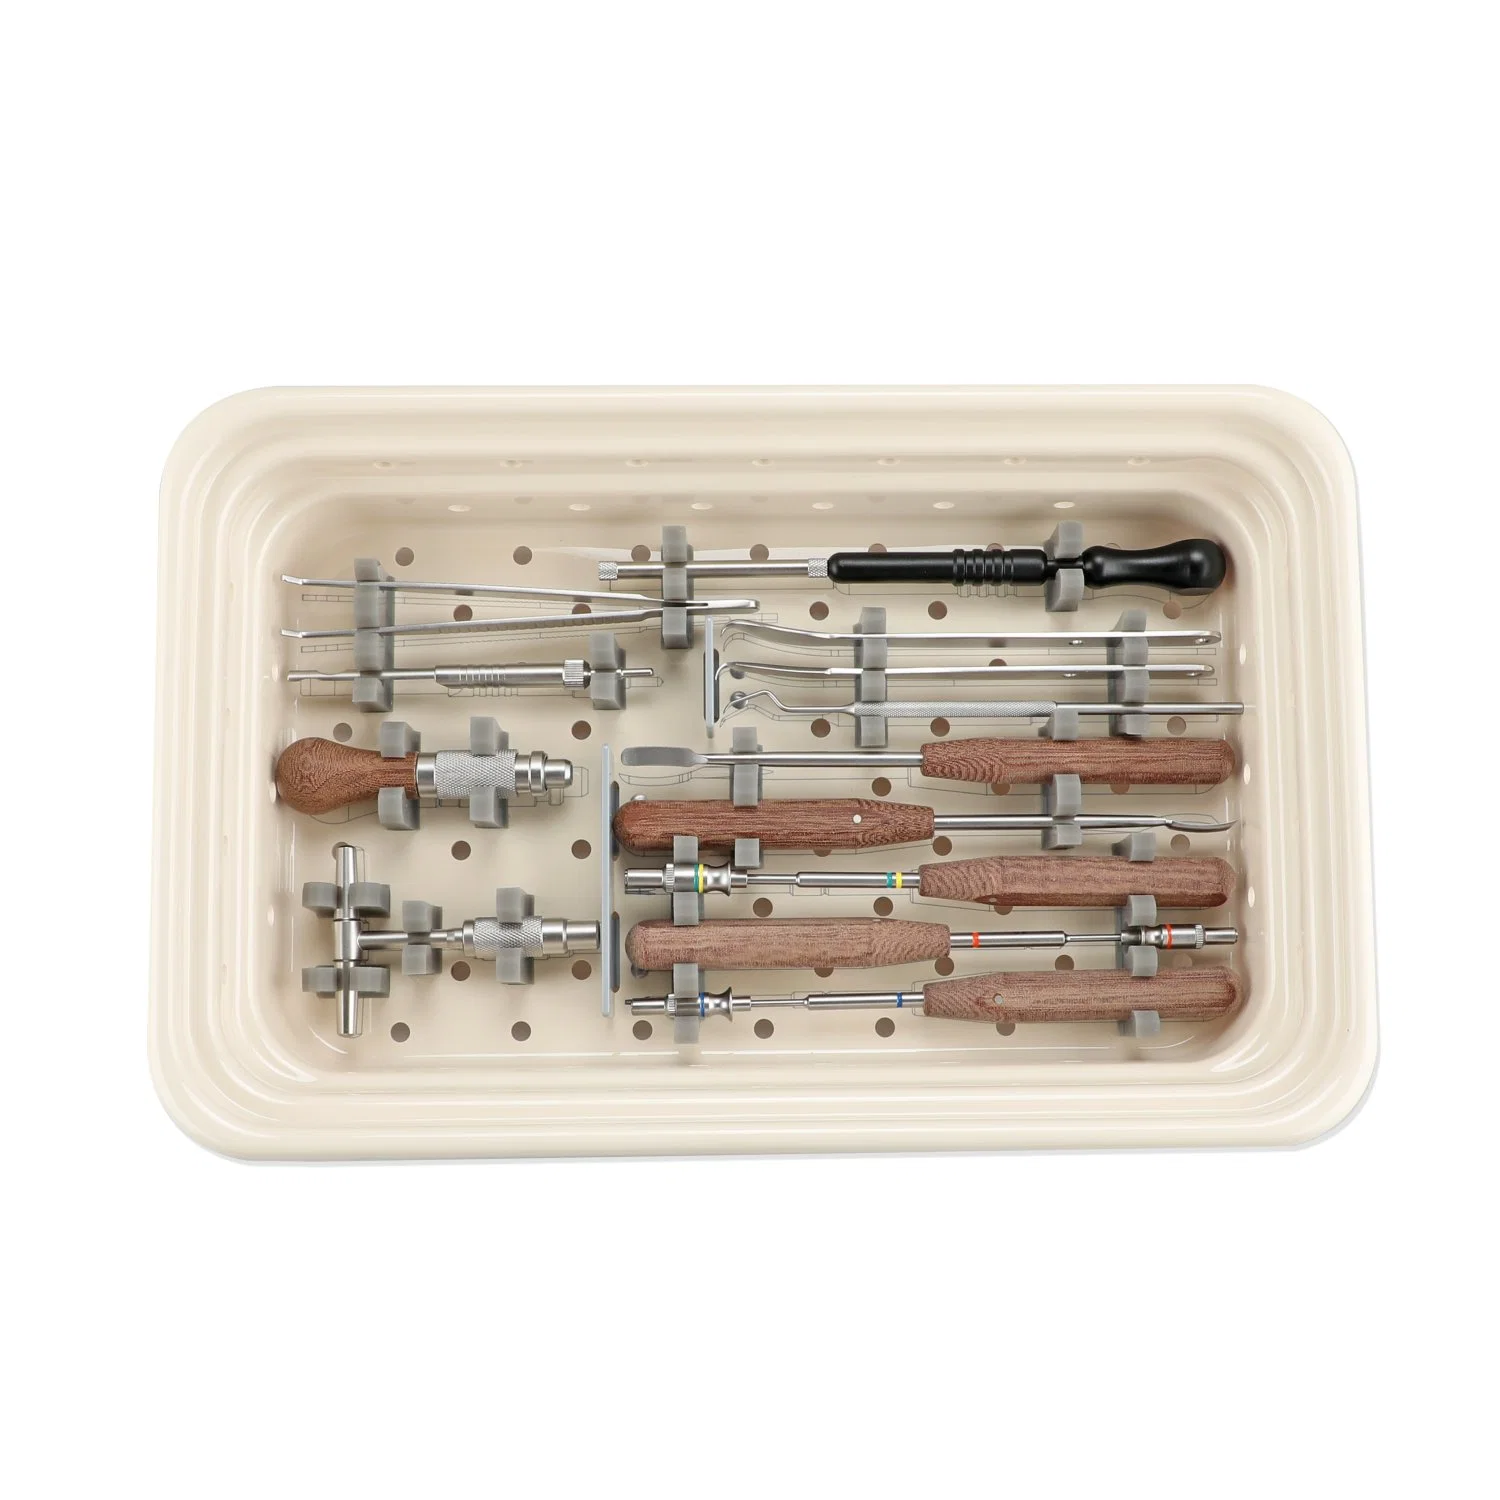 Hand and Foot Instrument Set, Orthopedic Set, Surgical Products